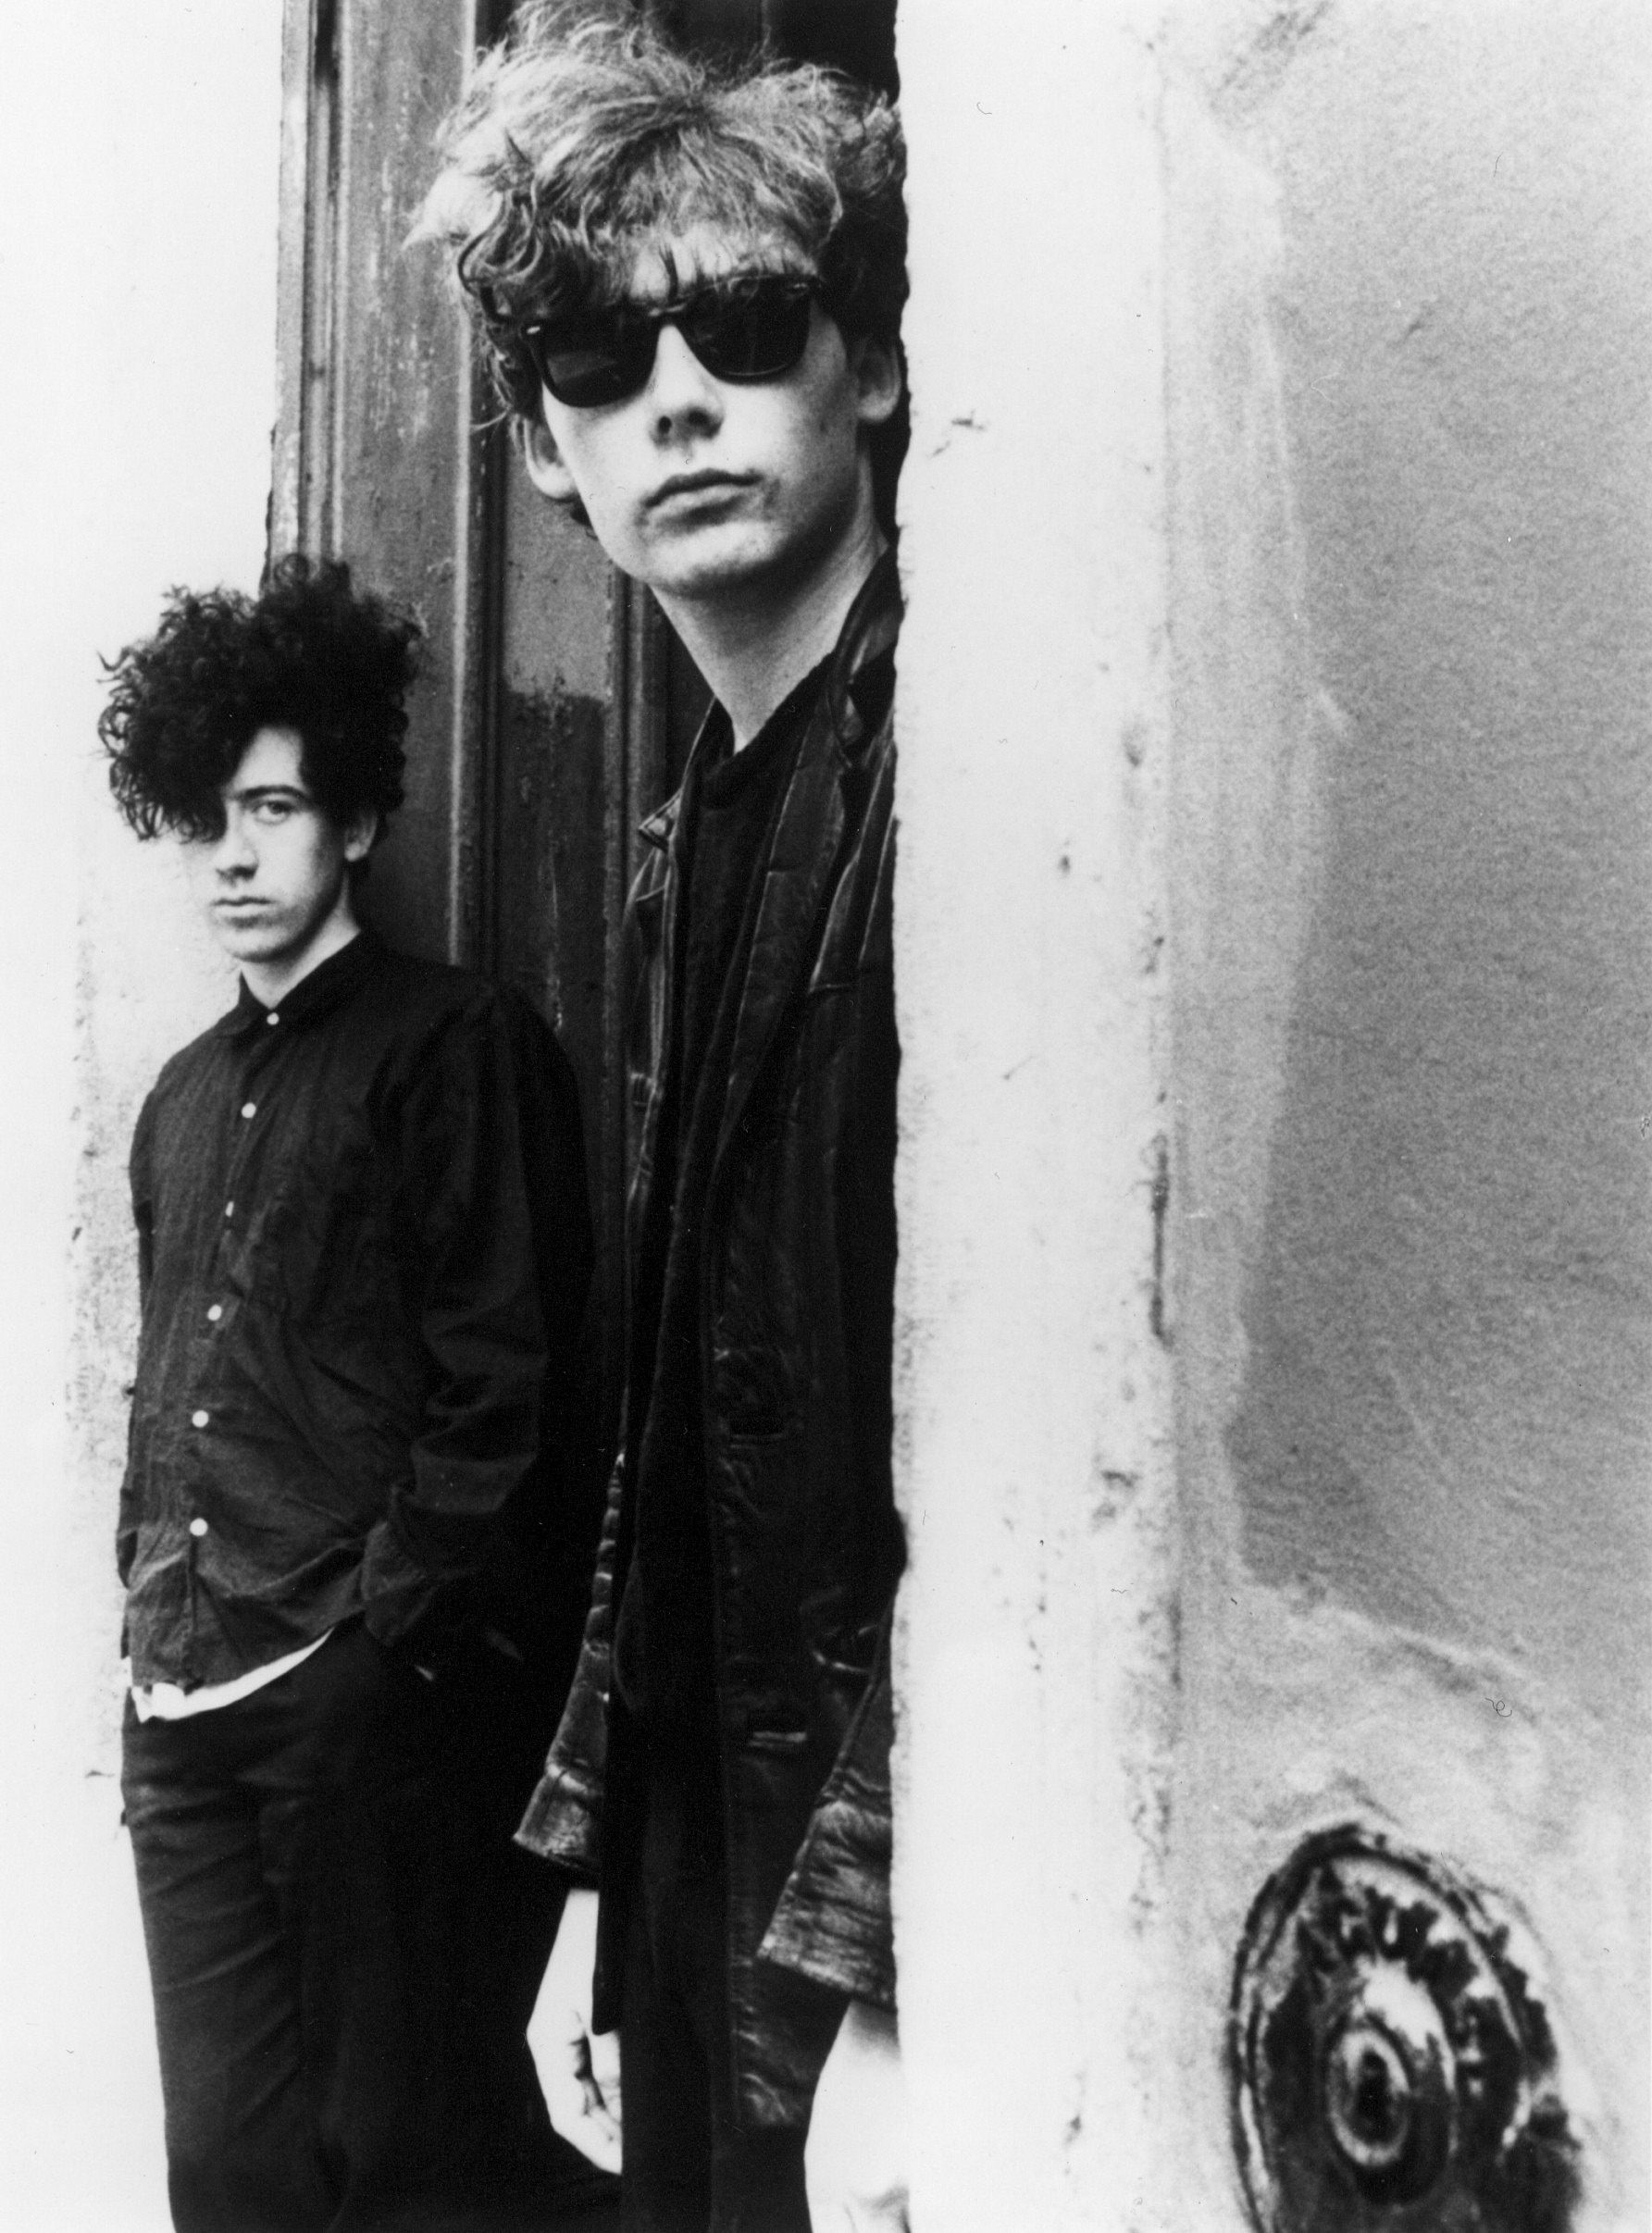 Jesus and Mary Chain — 30 years of 'Psychocandy' | The Seattle Times